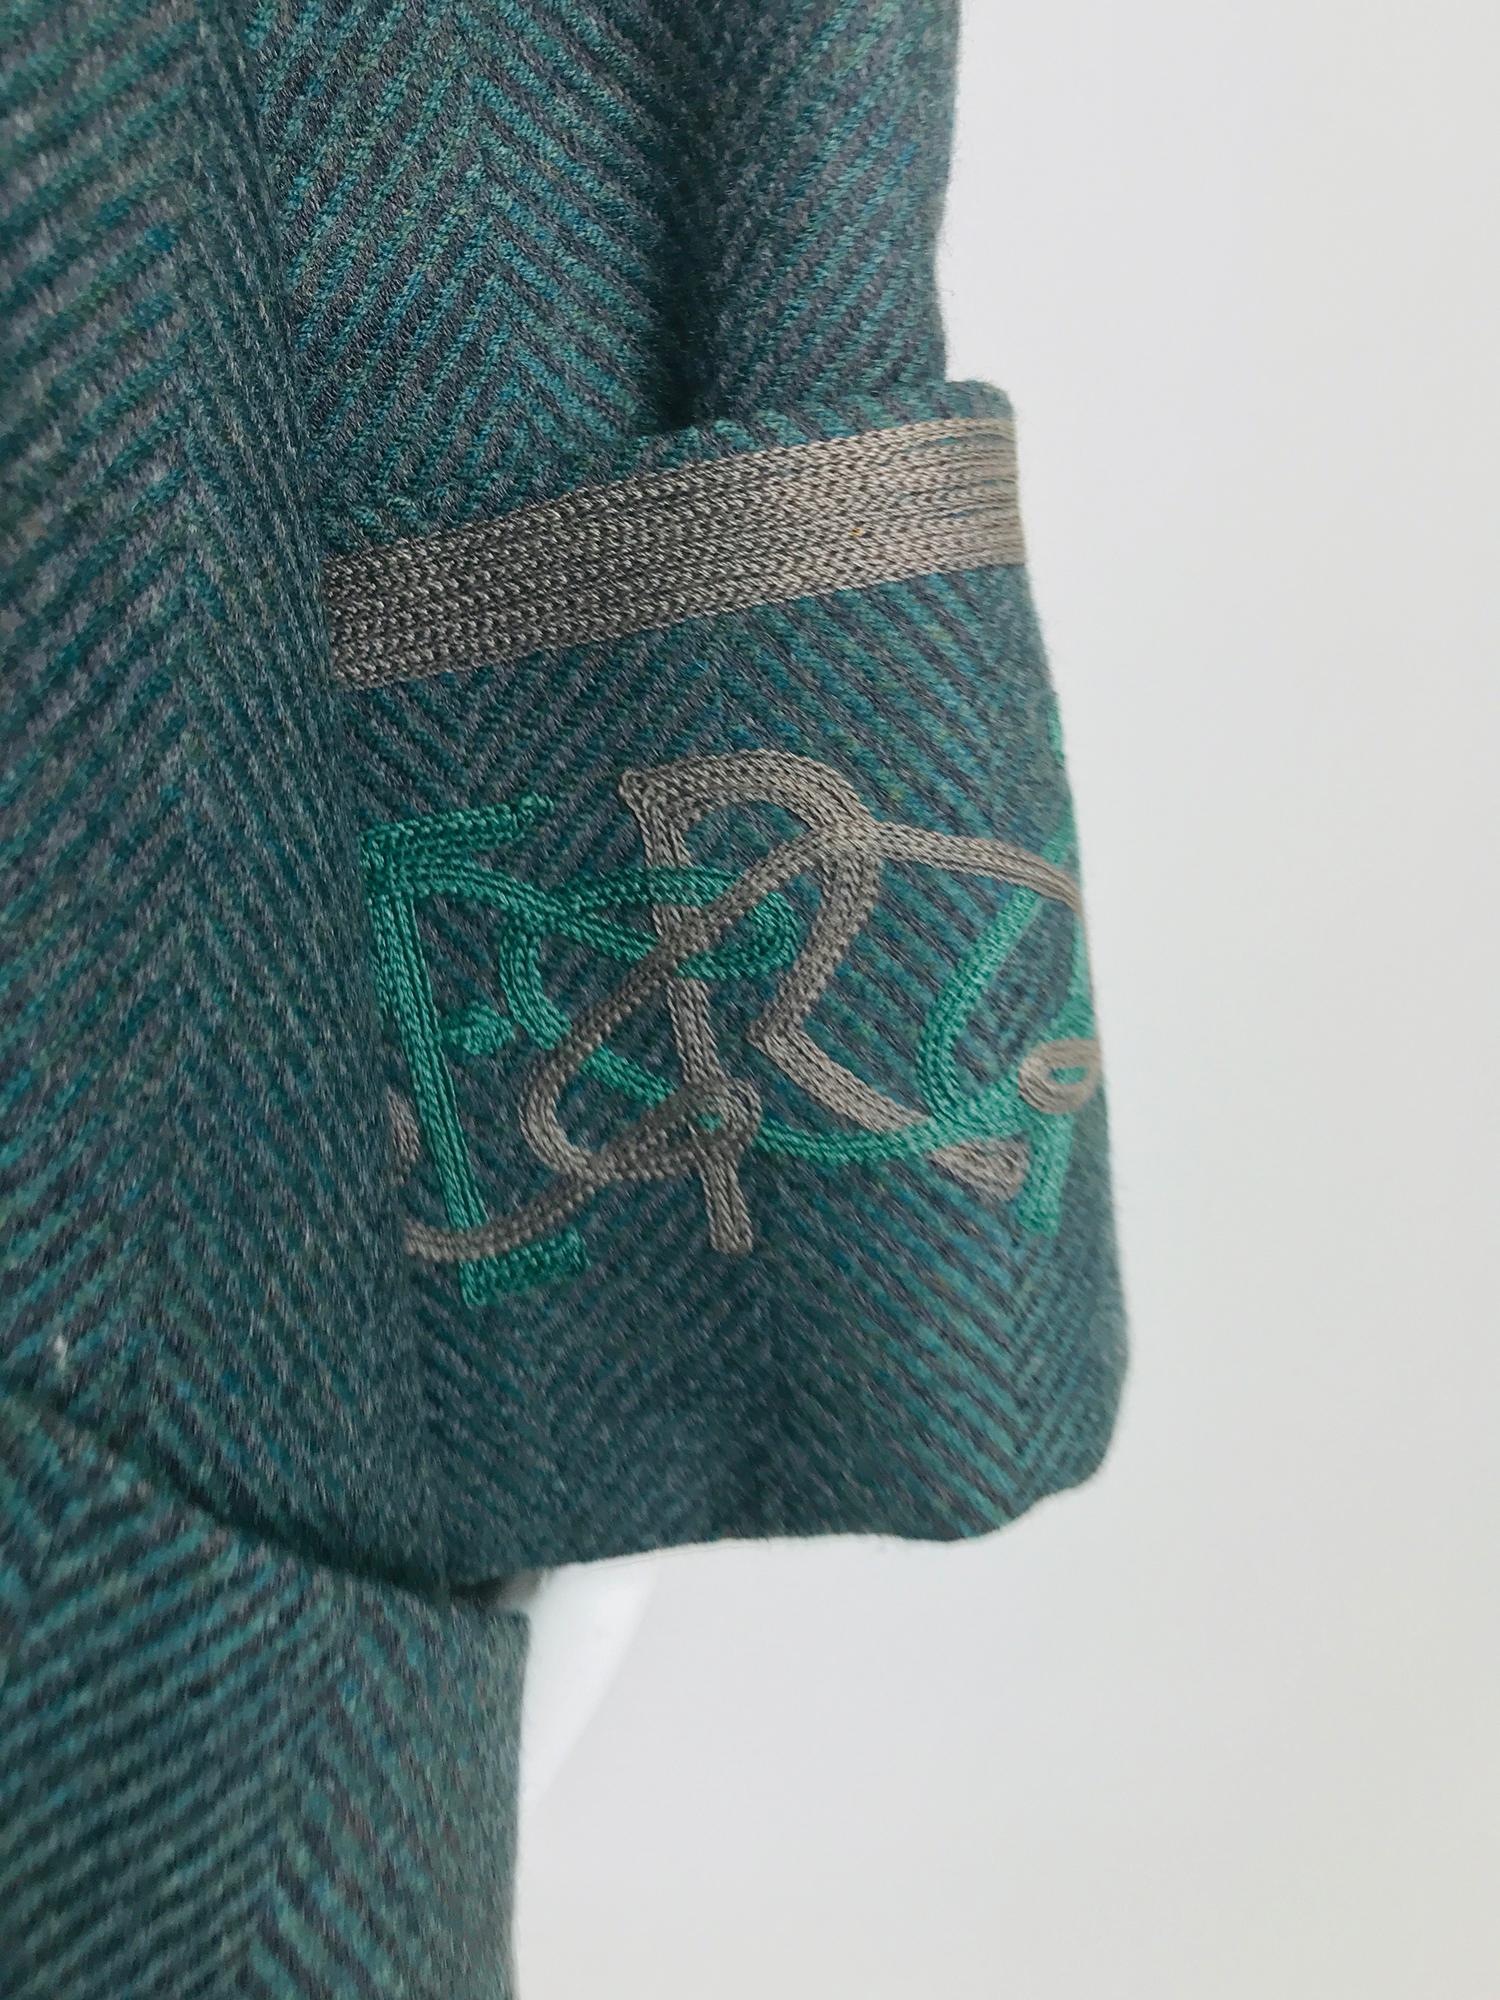 Chloe embroidered teal wool swing jacket and skirt from the 1980s 8